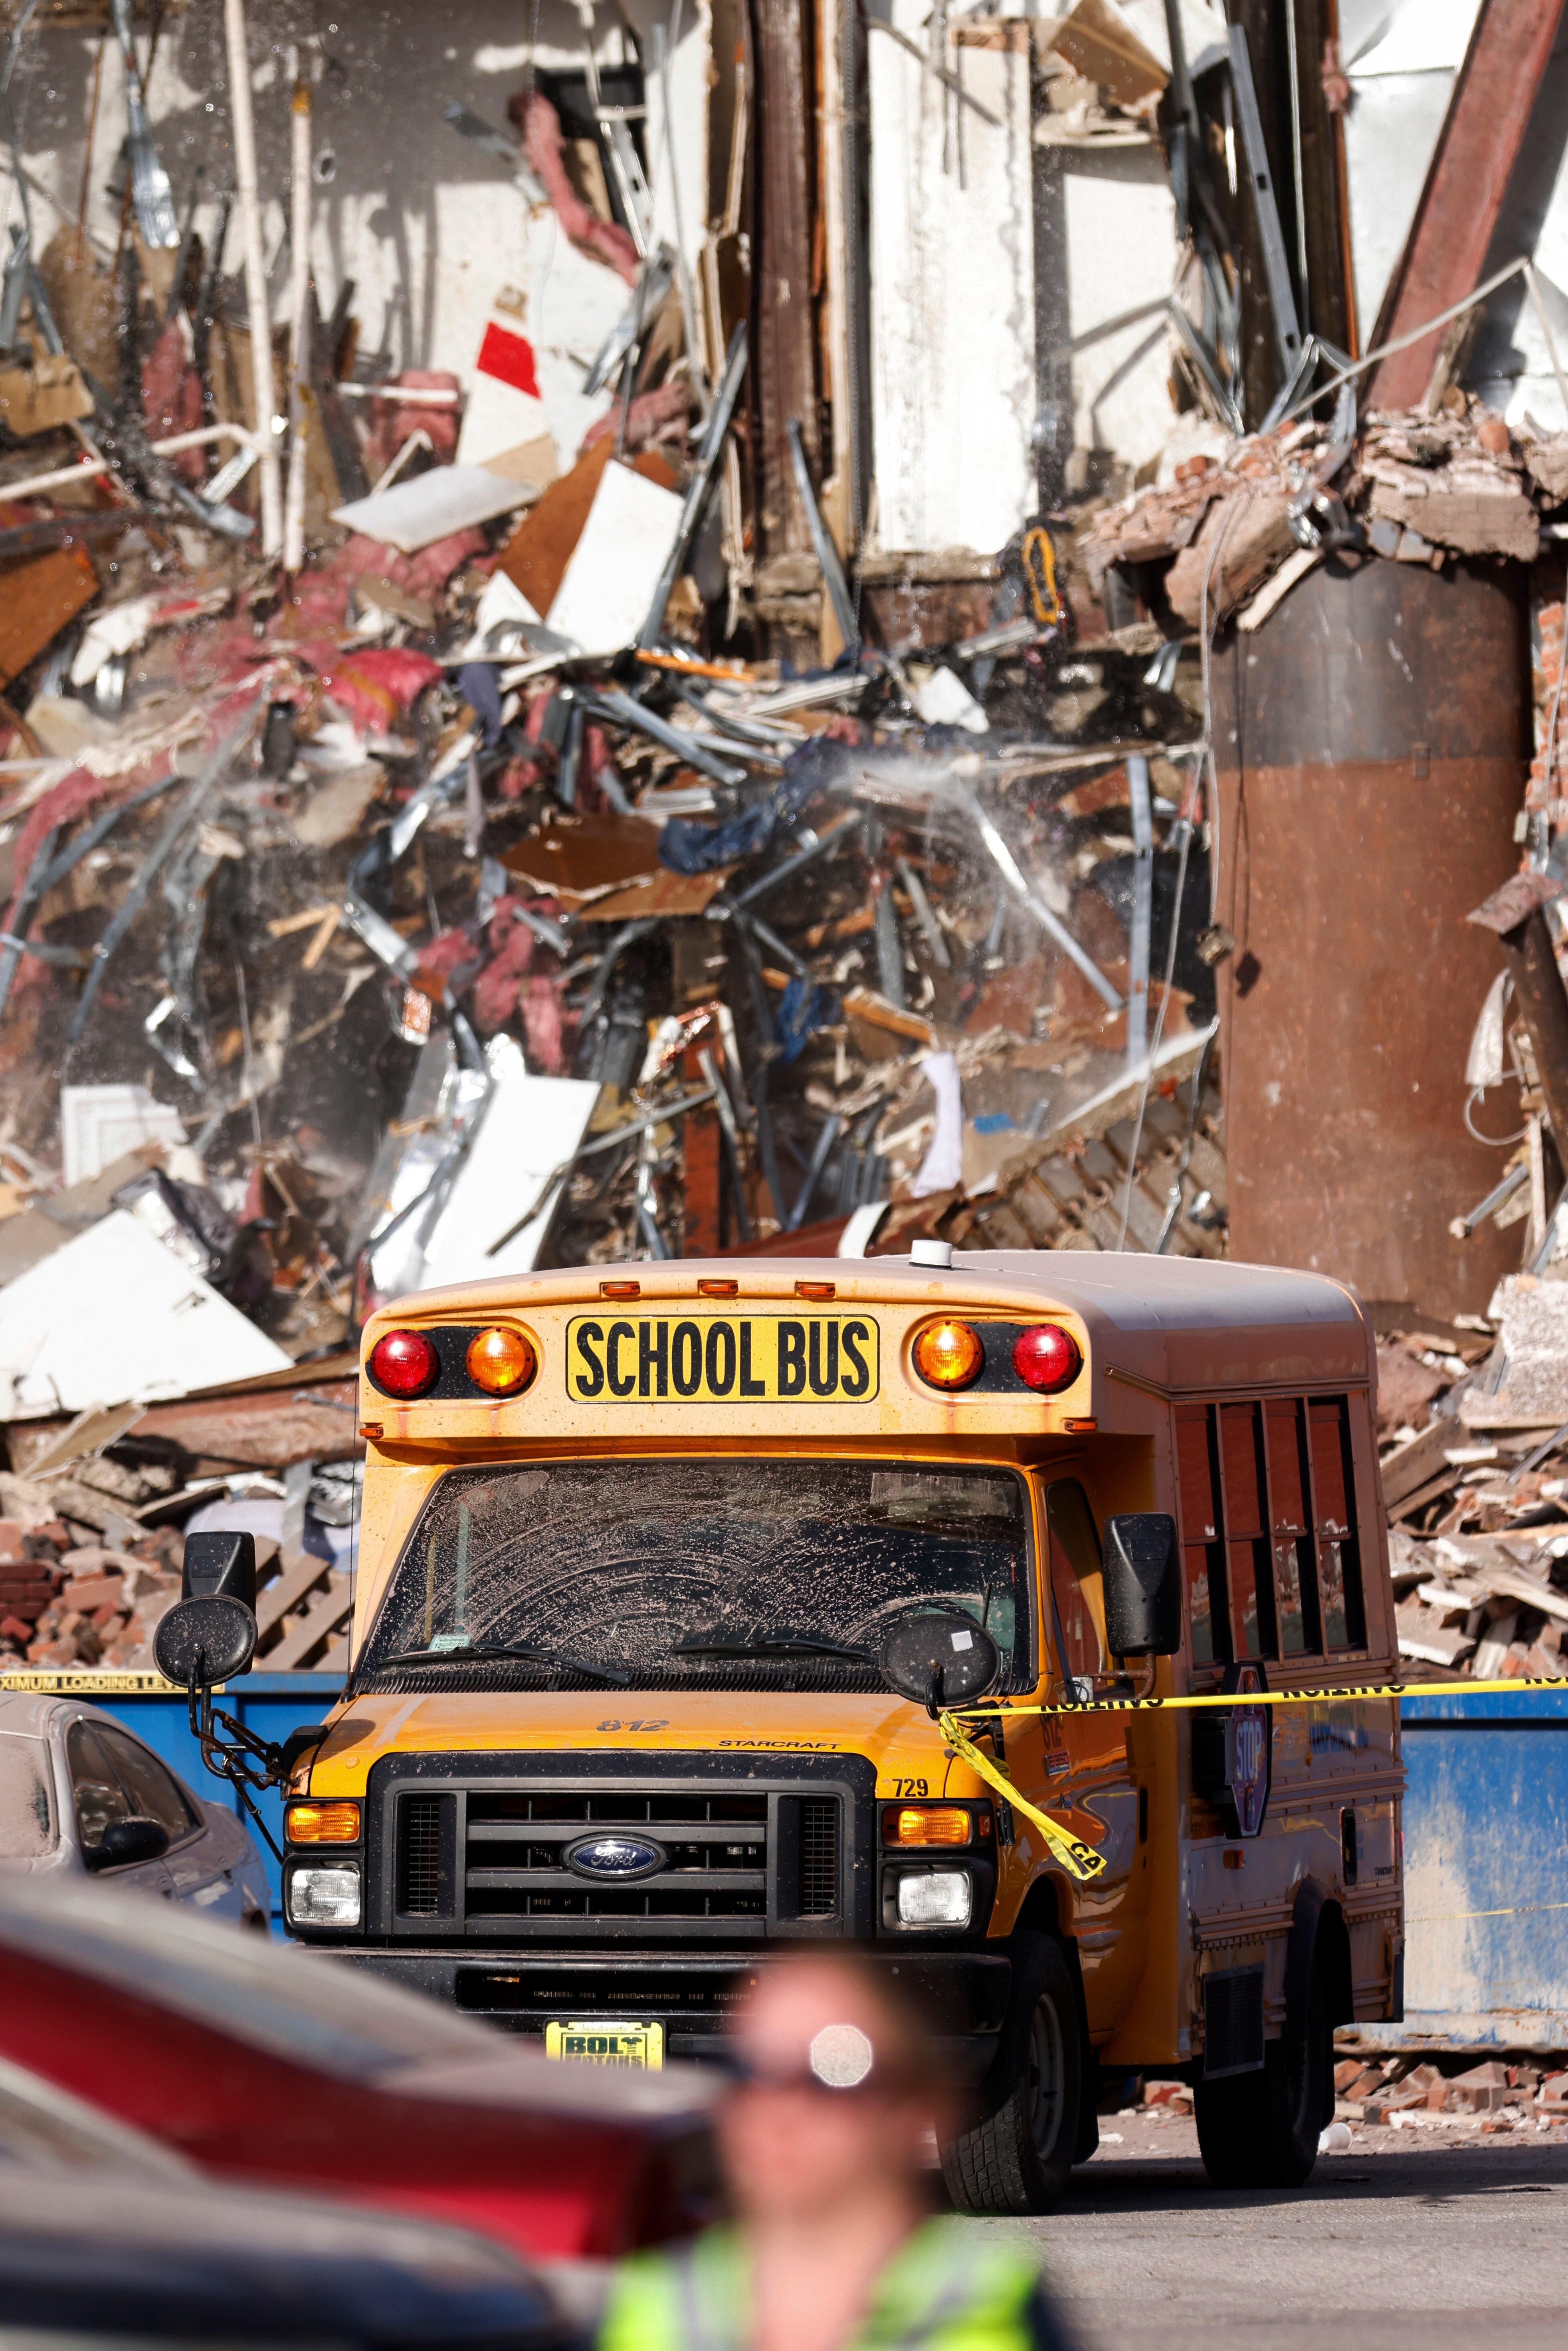 A school bus drives past the rubble after a building collapsed in Davenport, Iowa